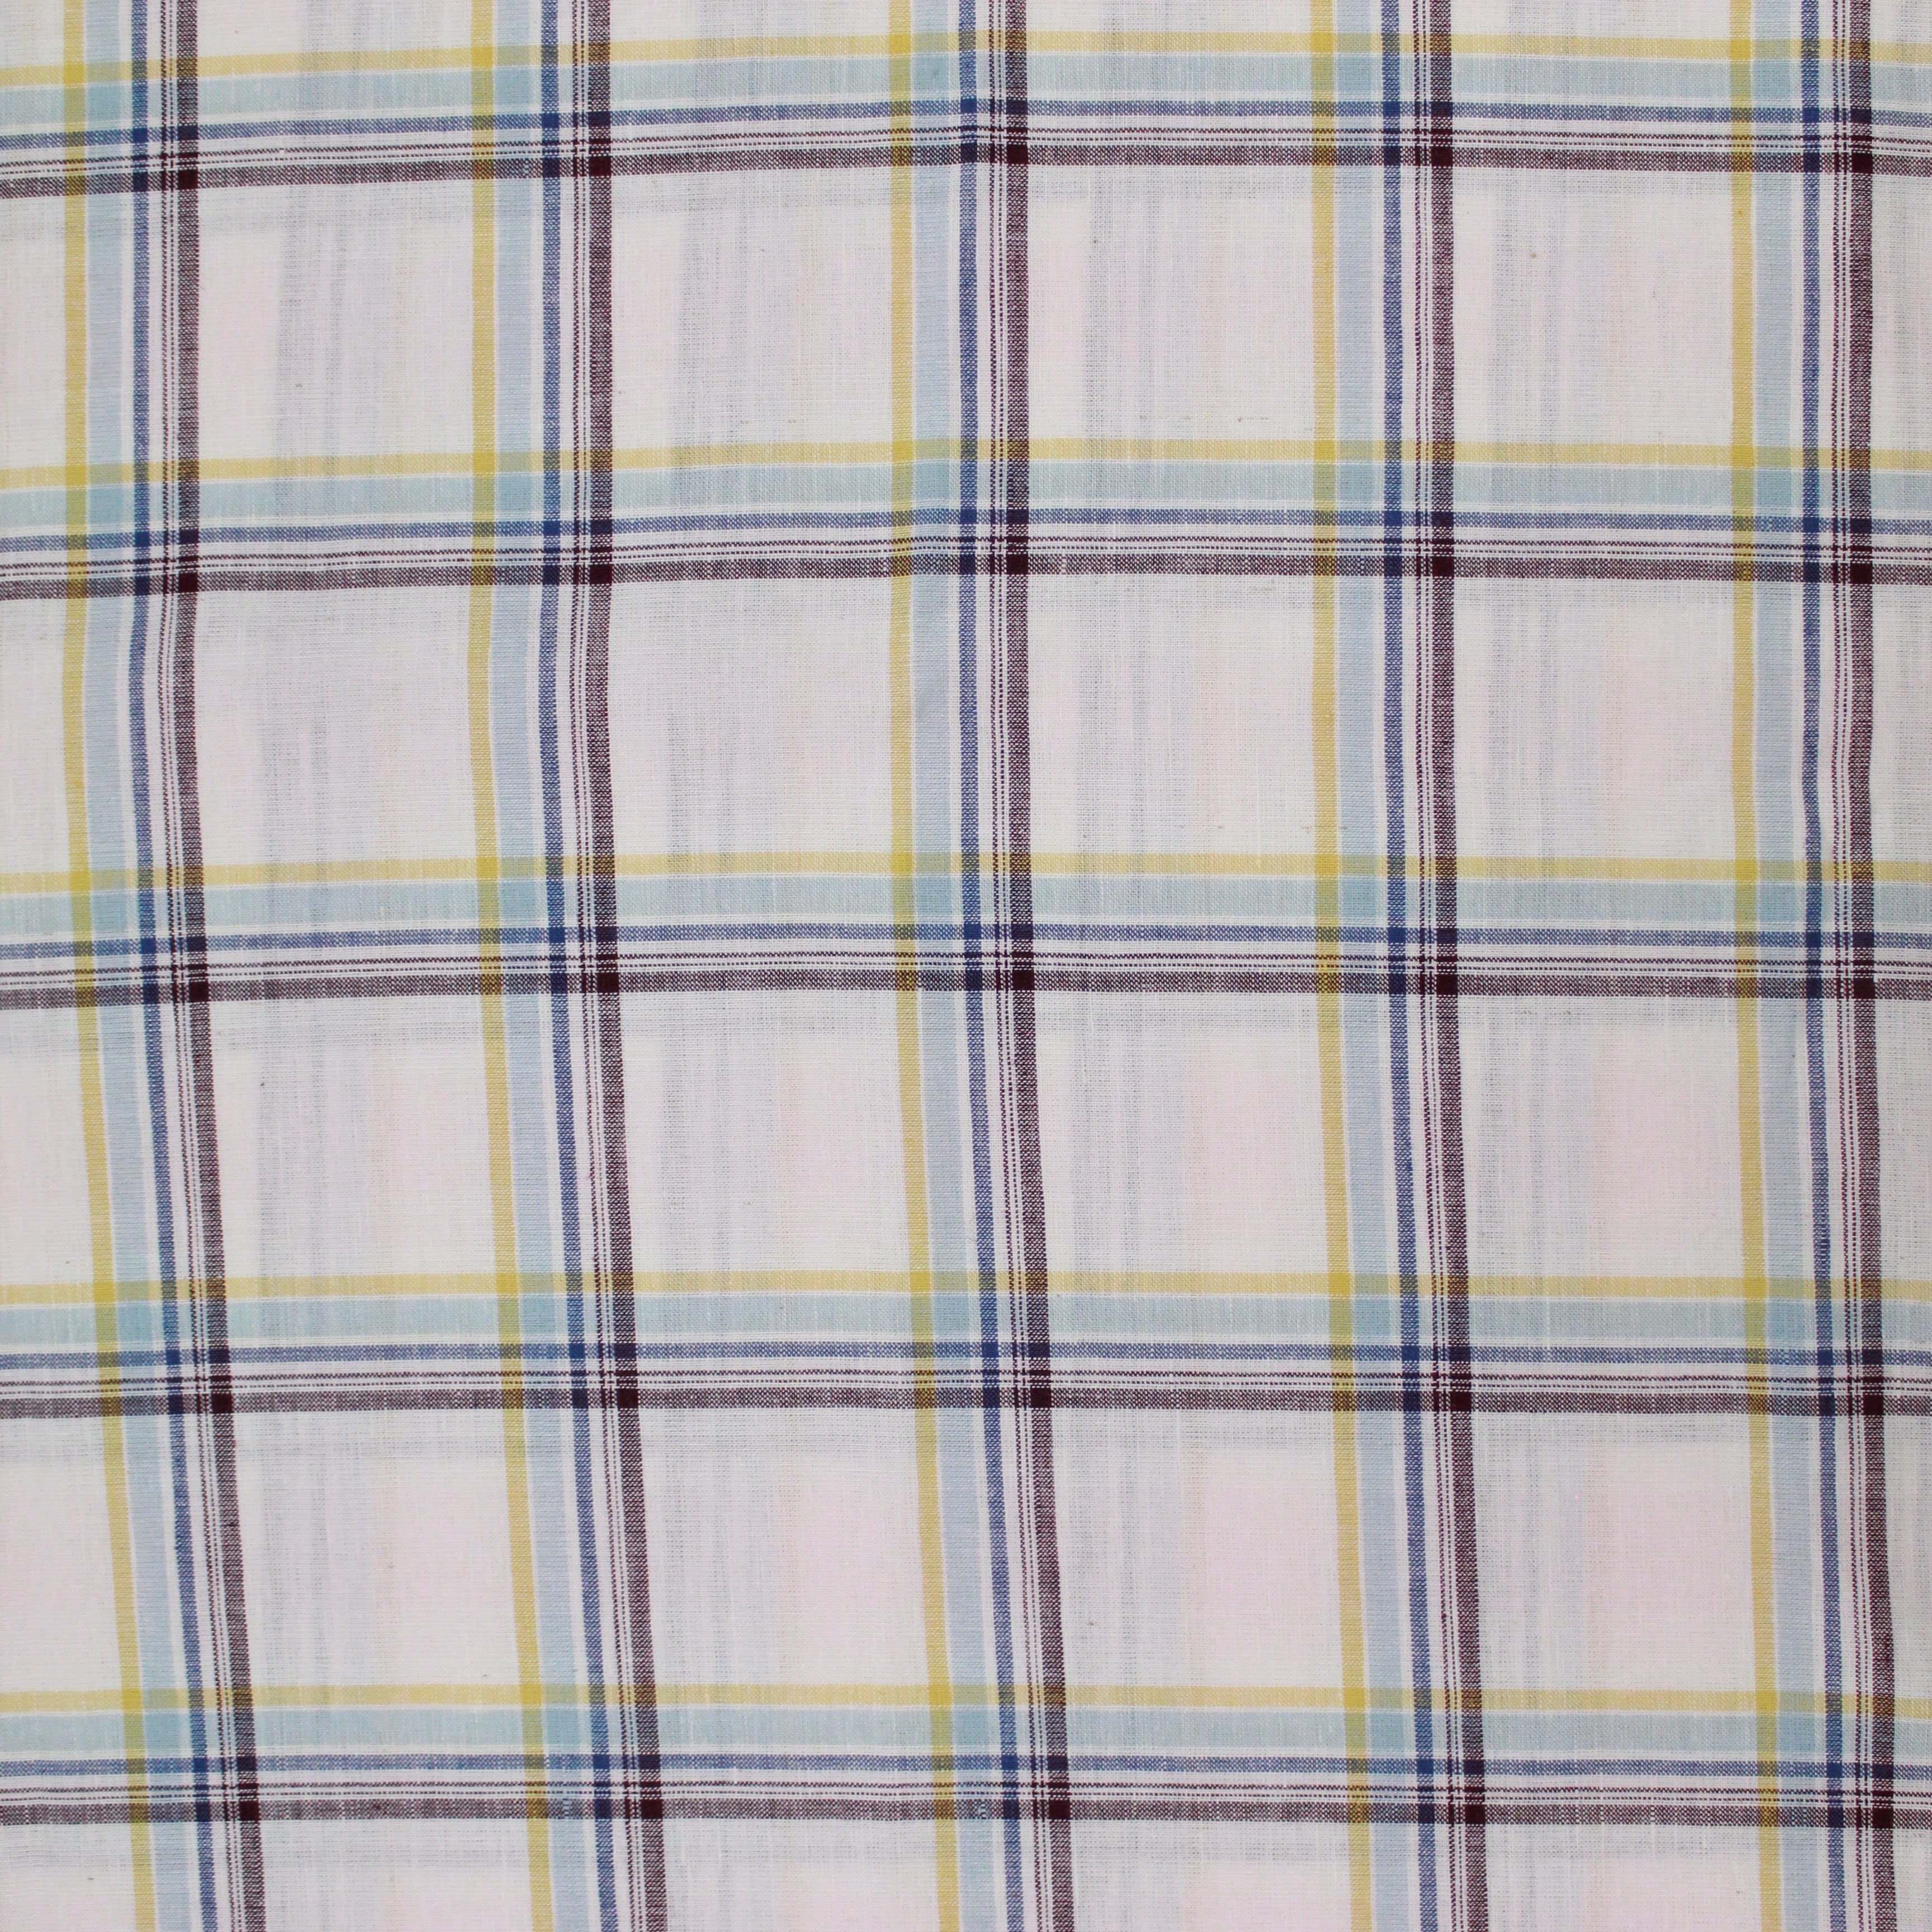 3FOR12 Premium Quality, Fashion Chequered Linen 54" Wide Pale Pink